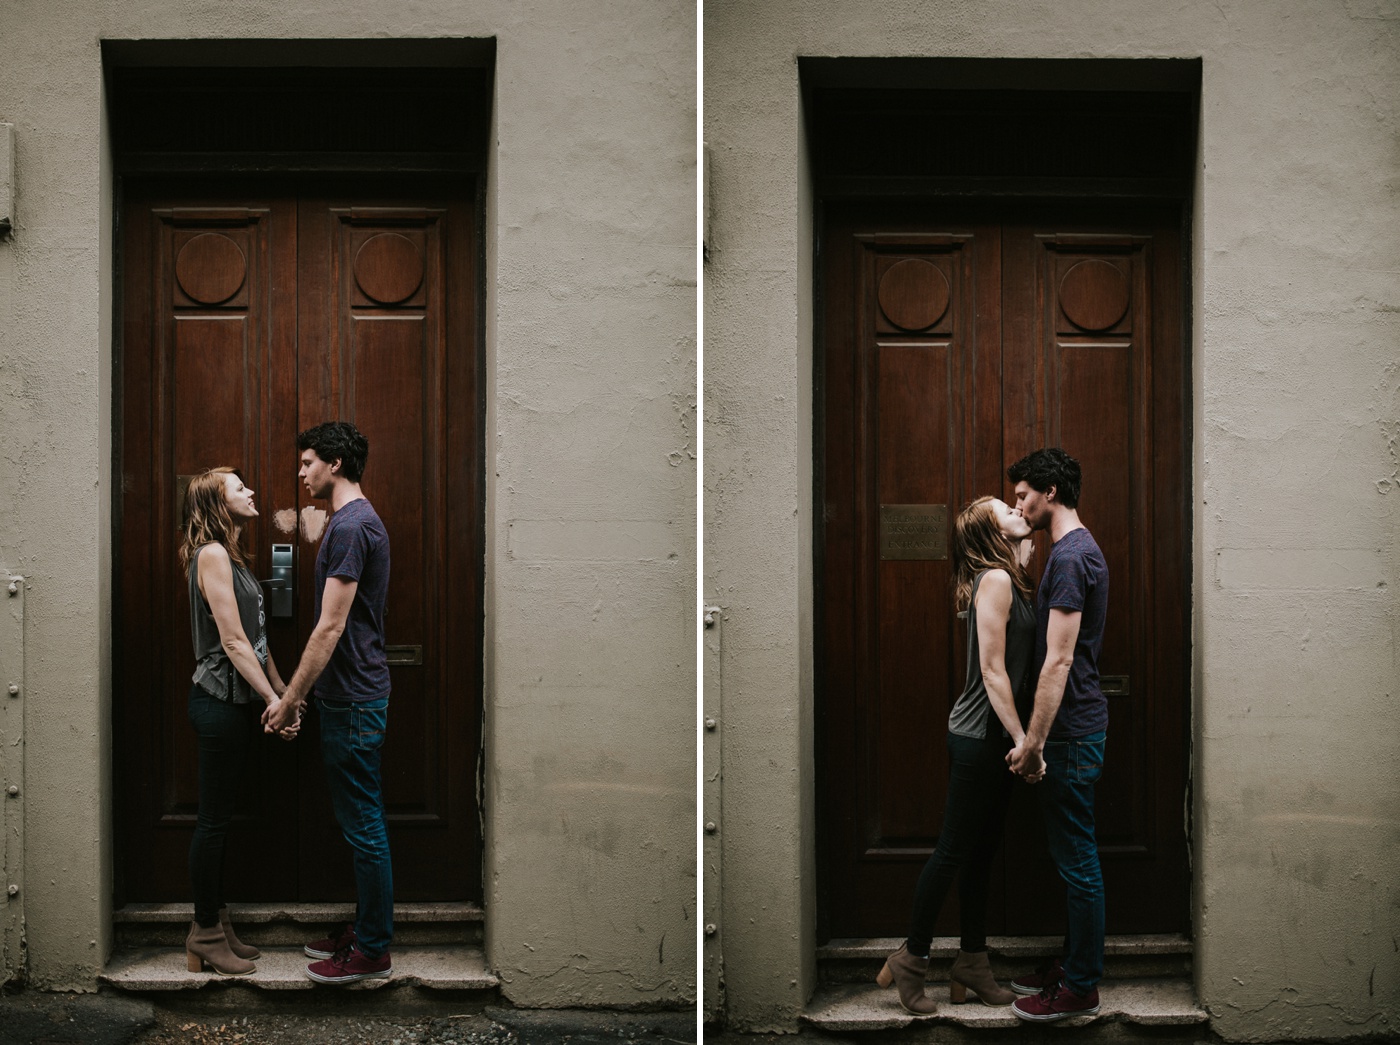 heli-alex_melbourne-fun-candid-gritty-relaxed-city-urban-couples-engagement-session_melbourne-wedding-photography_3